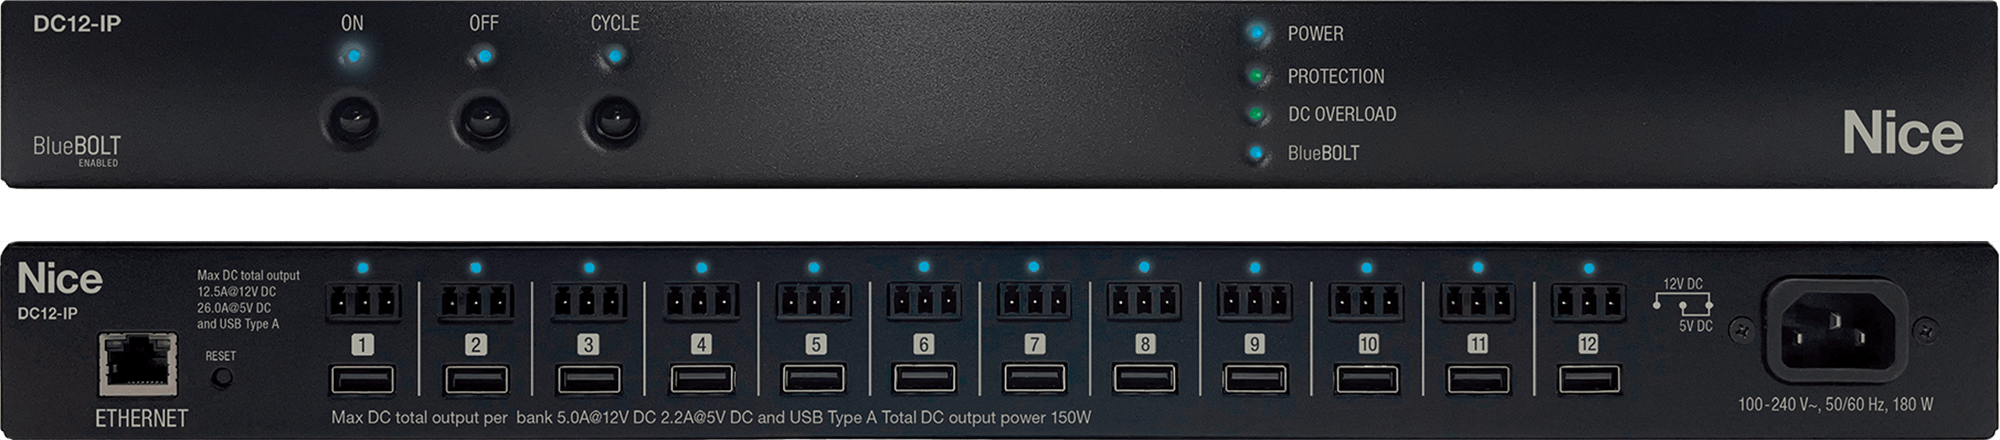 Nice DC12-IP Smart DC Power Manager Callout